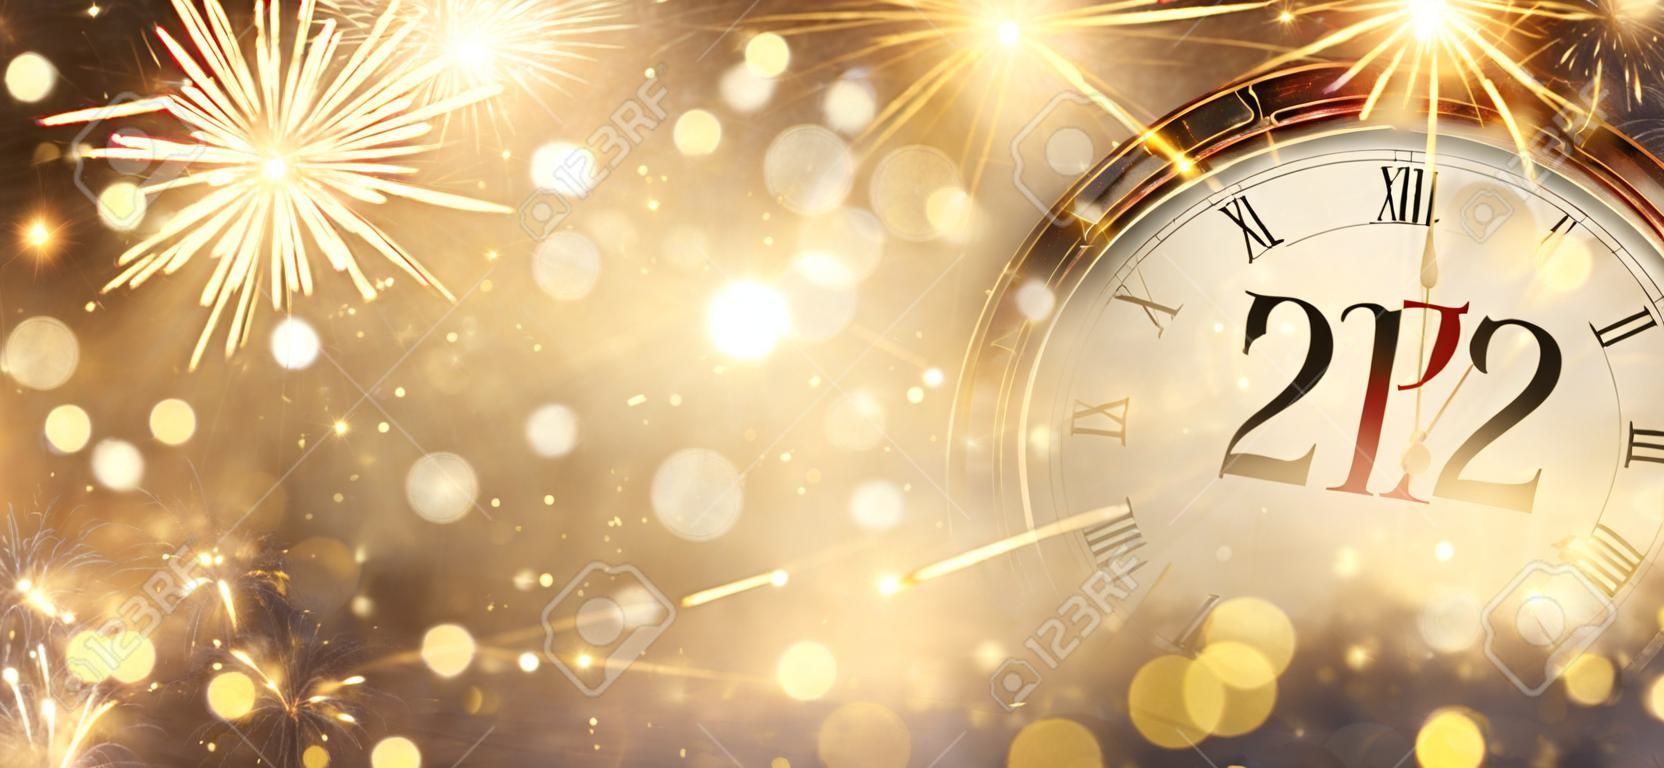 2022 New Year - Clock And Fireworks - Countdown To Midnight - Golden Abstract Defocused Background